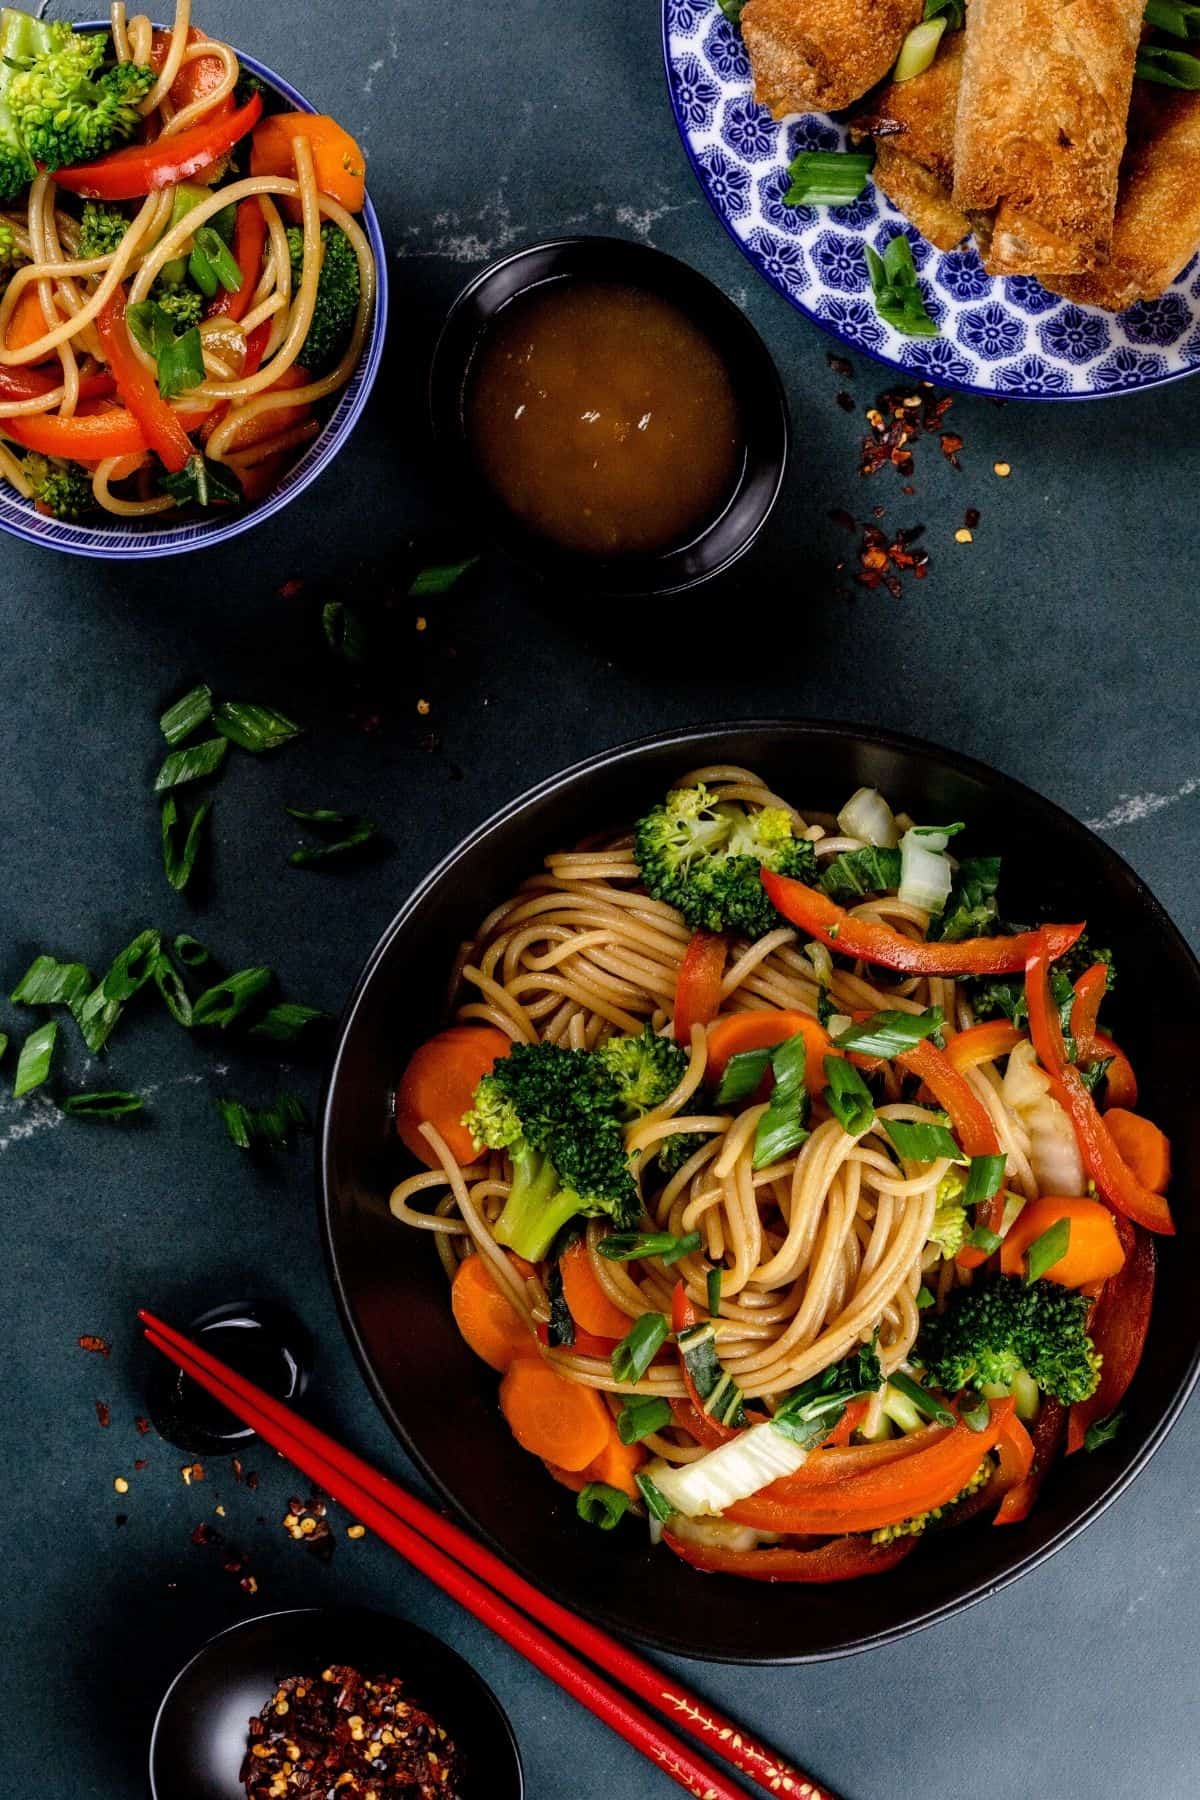 Many bowls of lo mein with a plate of egg rolls. Tiny bowls filled with red pepper flakes and dipping sauce are also seen. Red chopsticks are next to the bowls. Sliced green onions are sprinkled around.